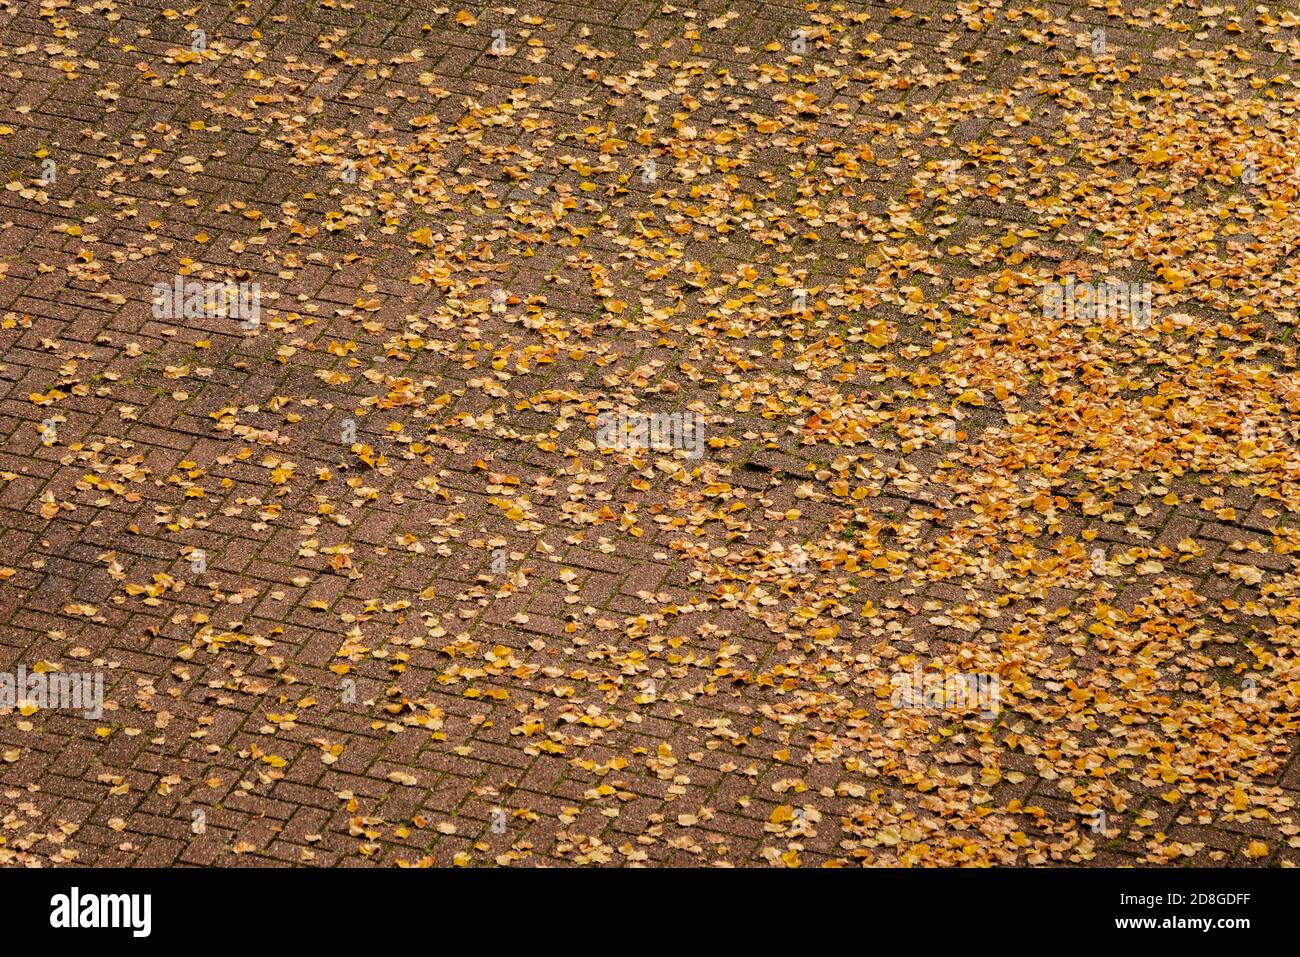 Aerial perspective of autumn leaves covering bricks on the ground Stock Photo